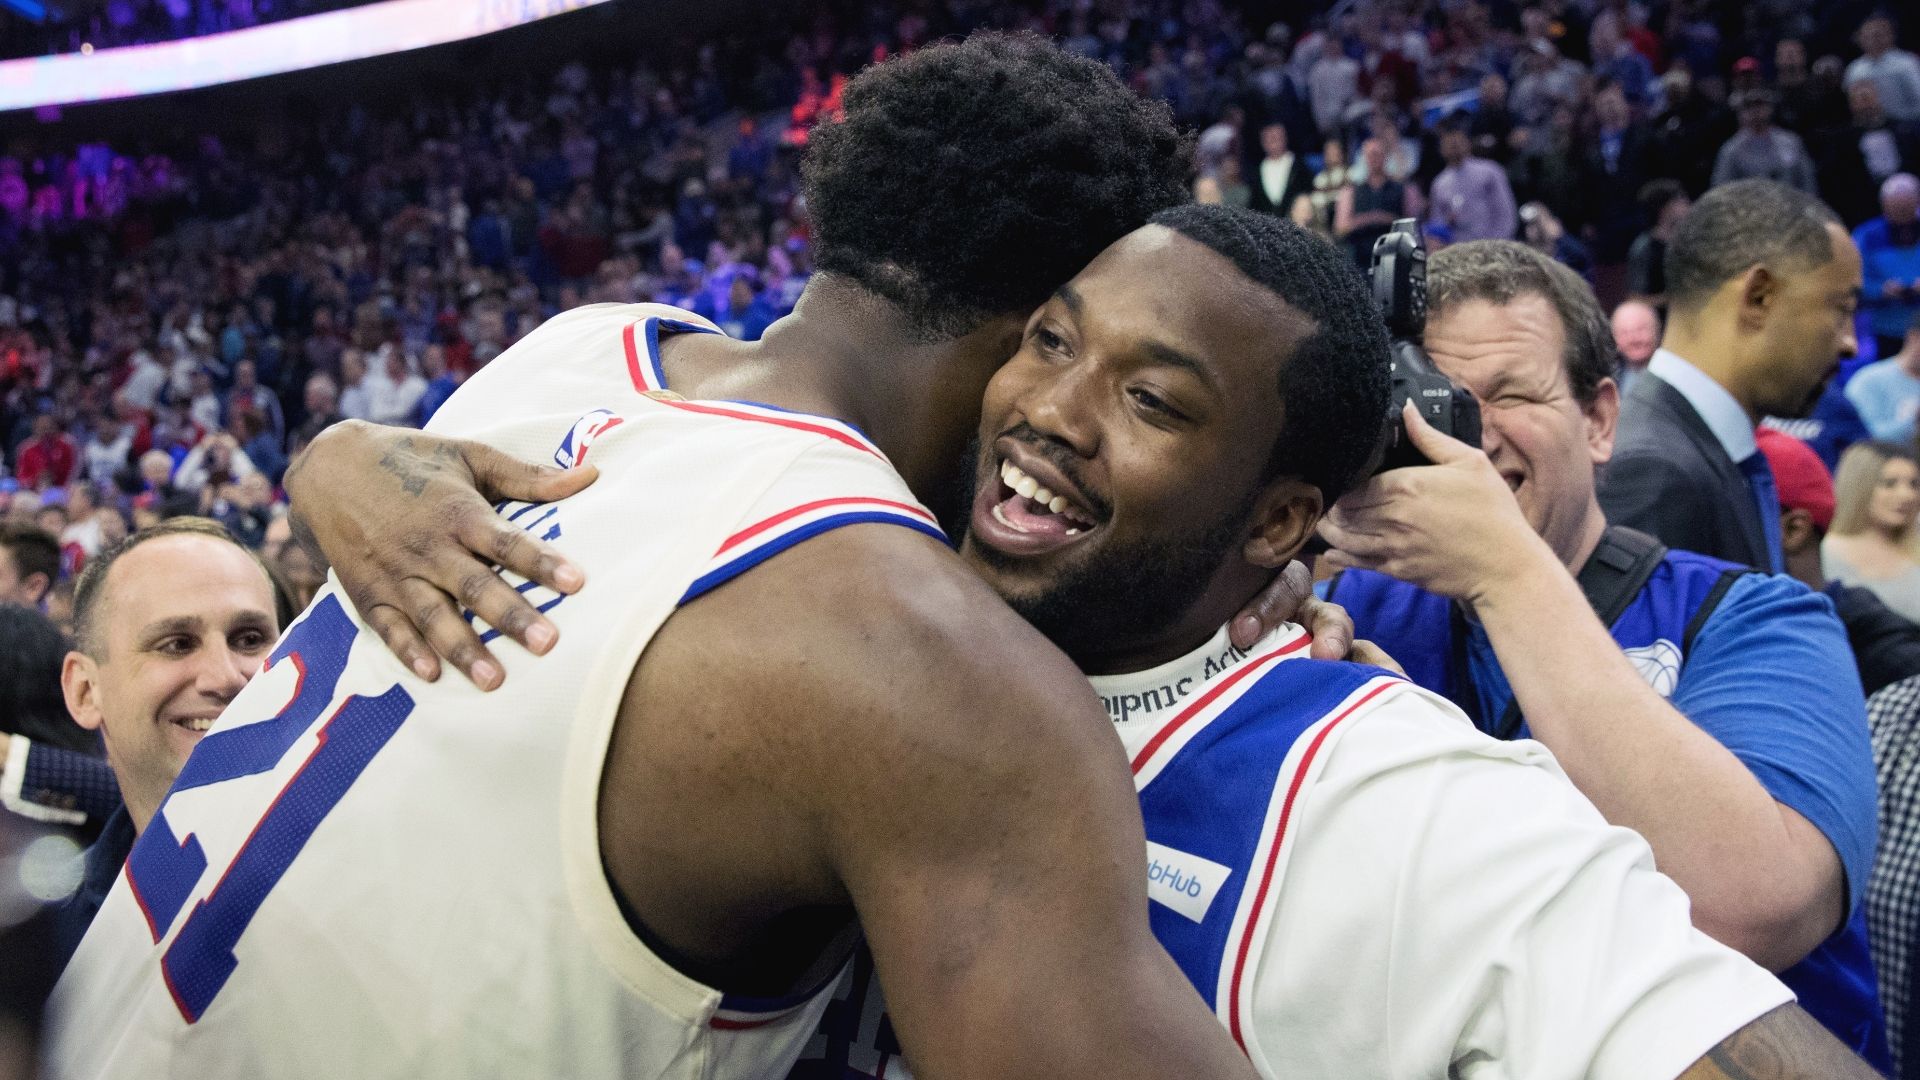 Meek Mill enjoys his freedom at 76ers' game